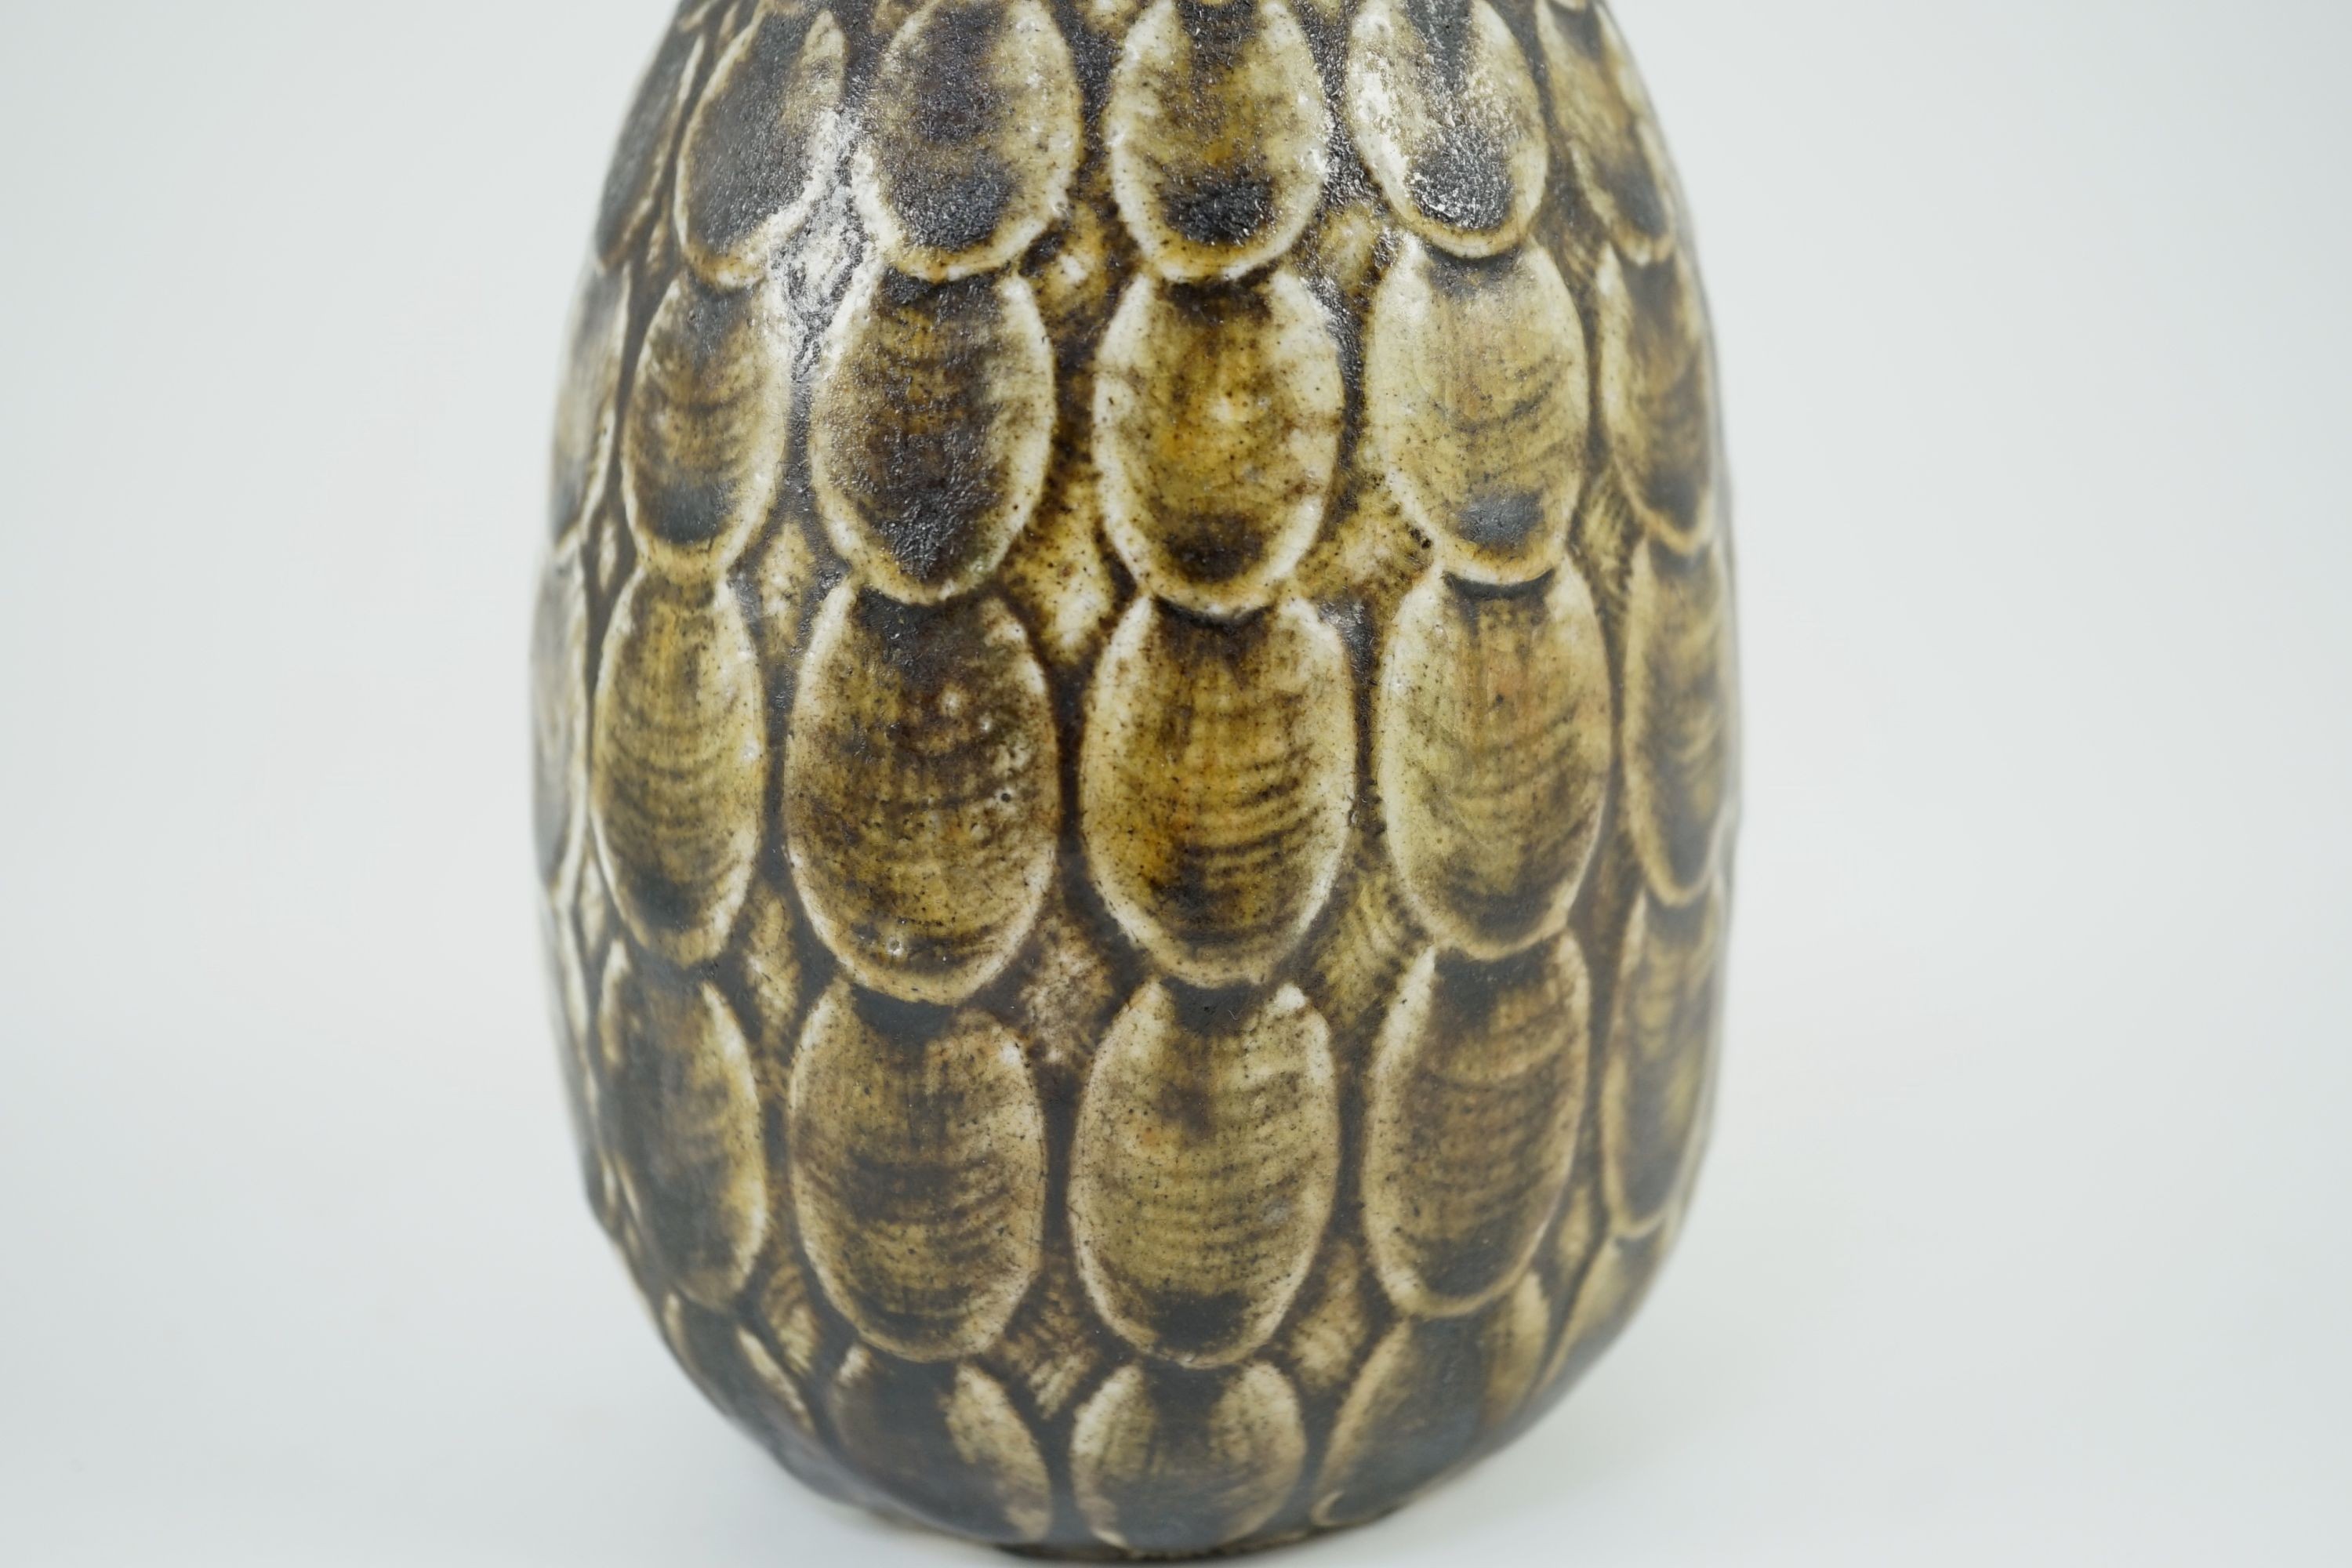 A Martin Brothers scale pattern ovoid small vase, dated 1910, 13.5 cm high